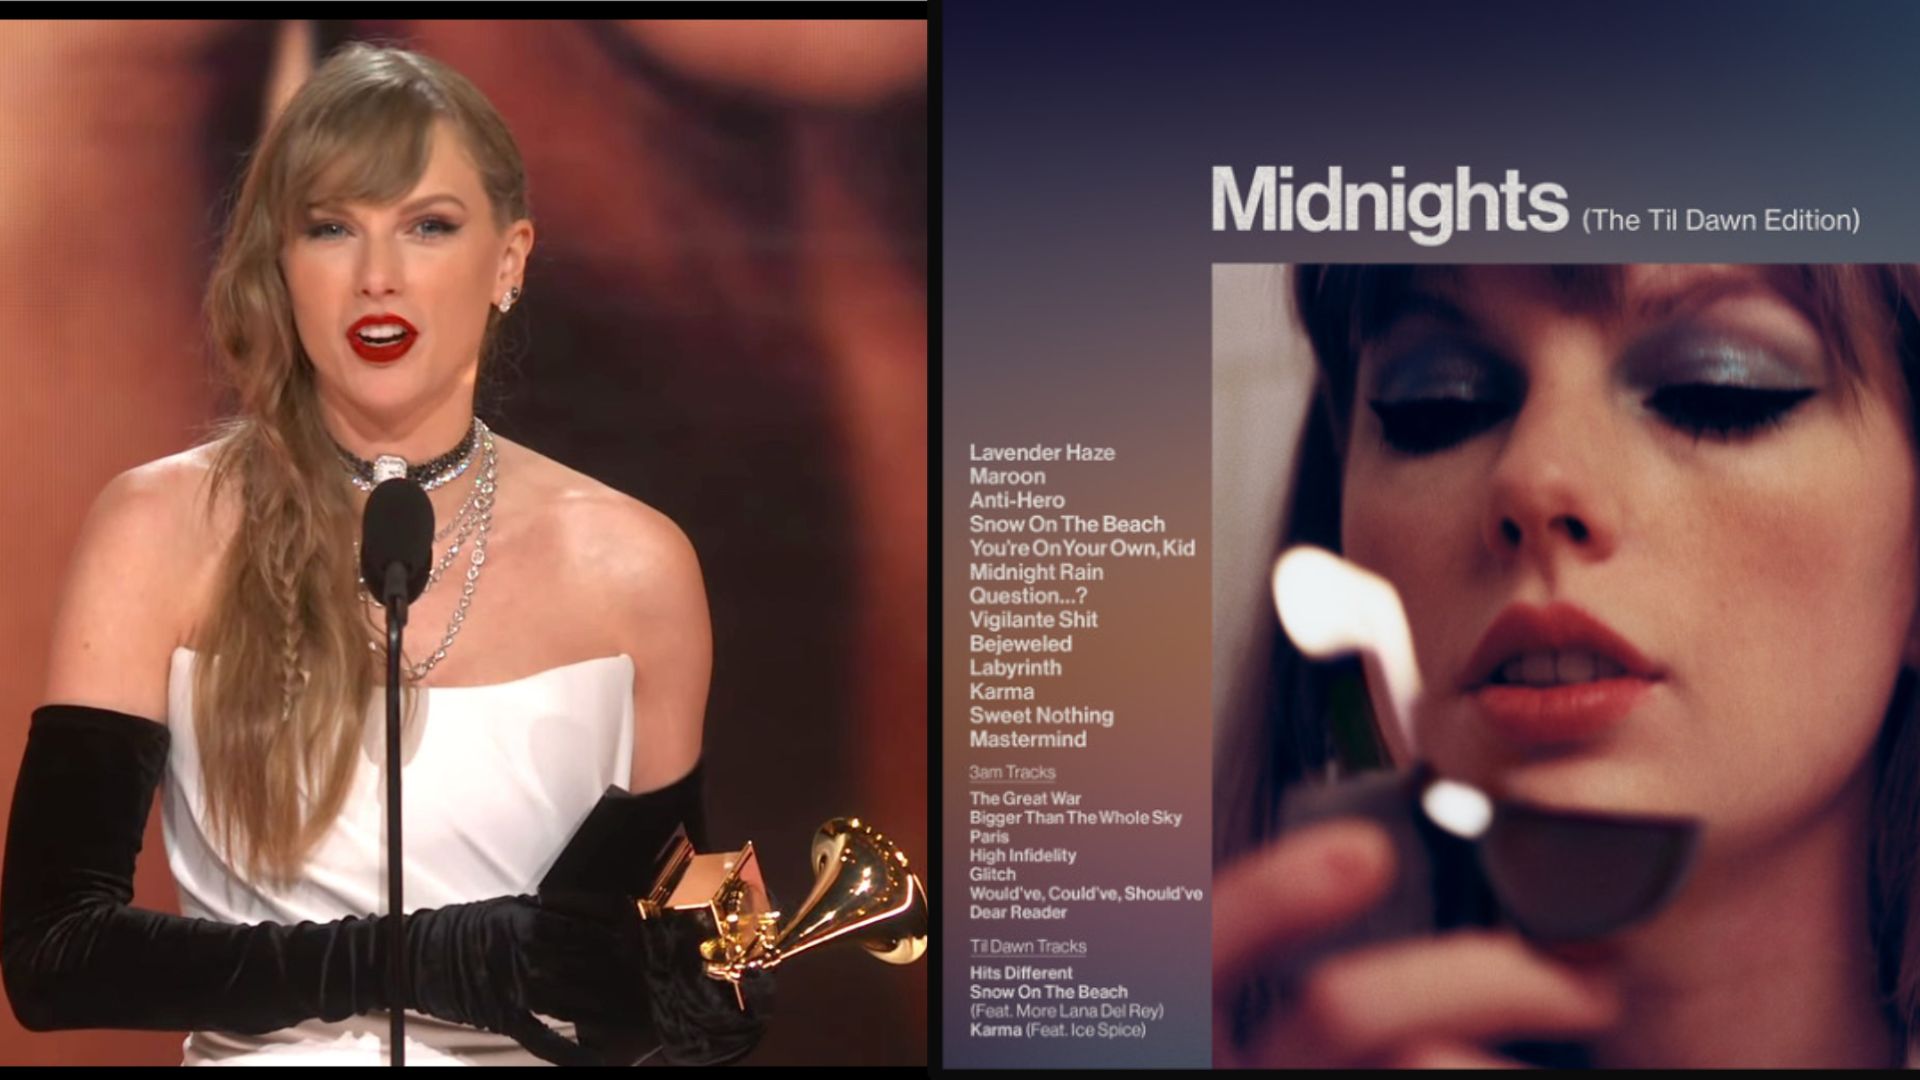 Thrilling moment for ‘Swifties’, Taylor Swift Secures 13th Grammy Win with ‘Midnights’ as Best Pop Vocal Album